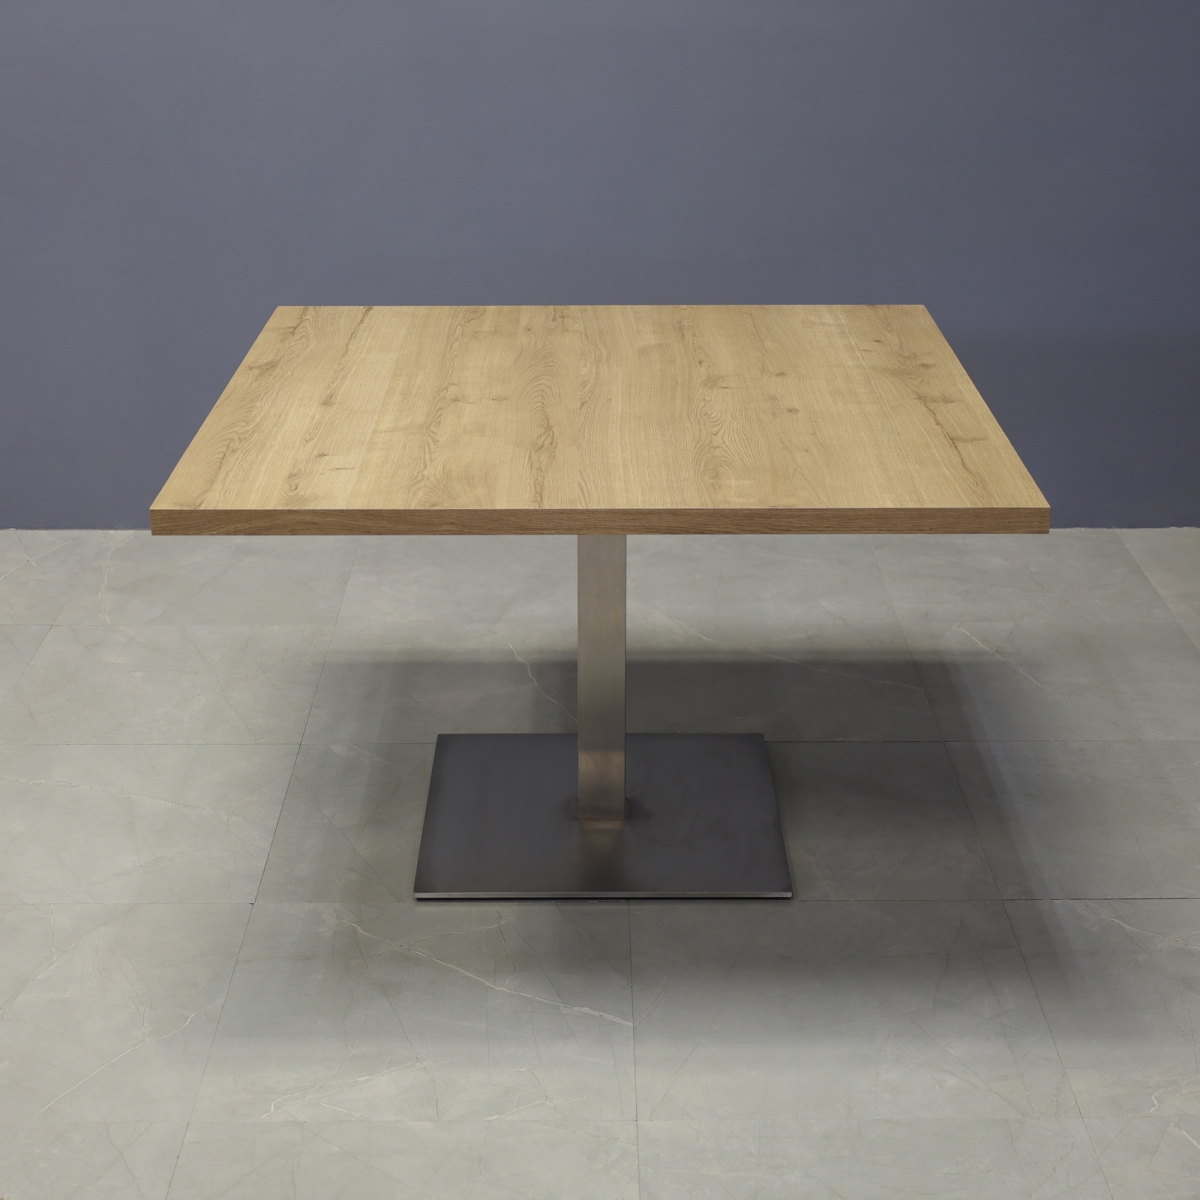 California Square Conference Table with Laminate Top